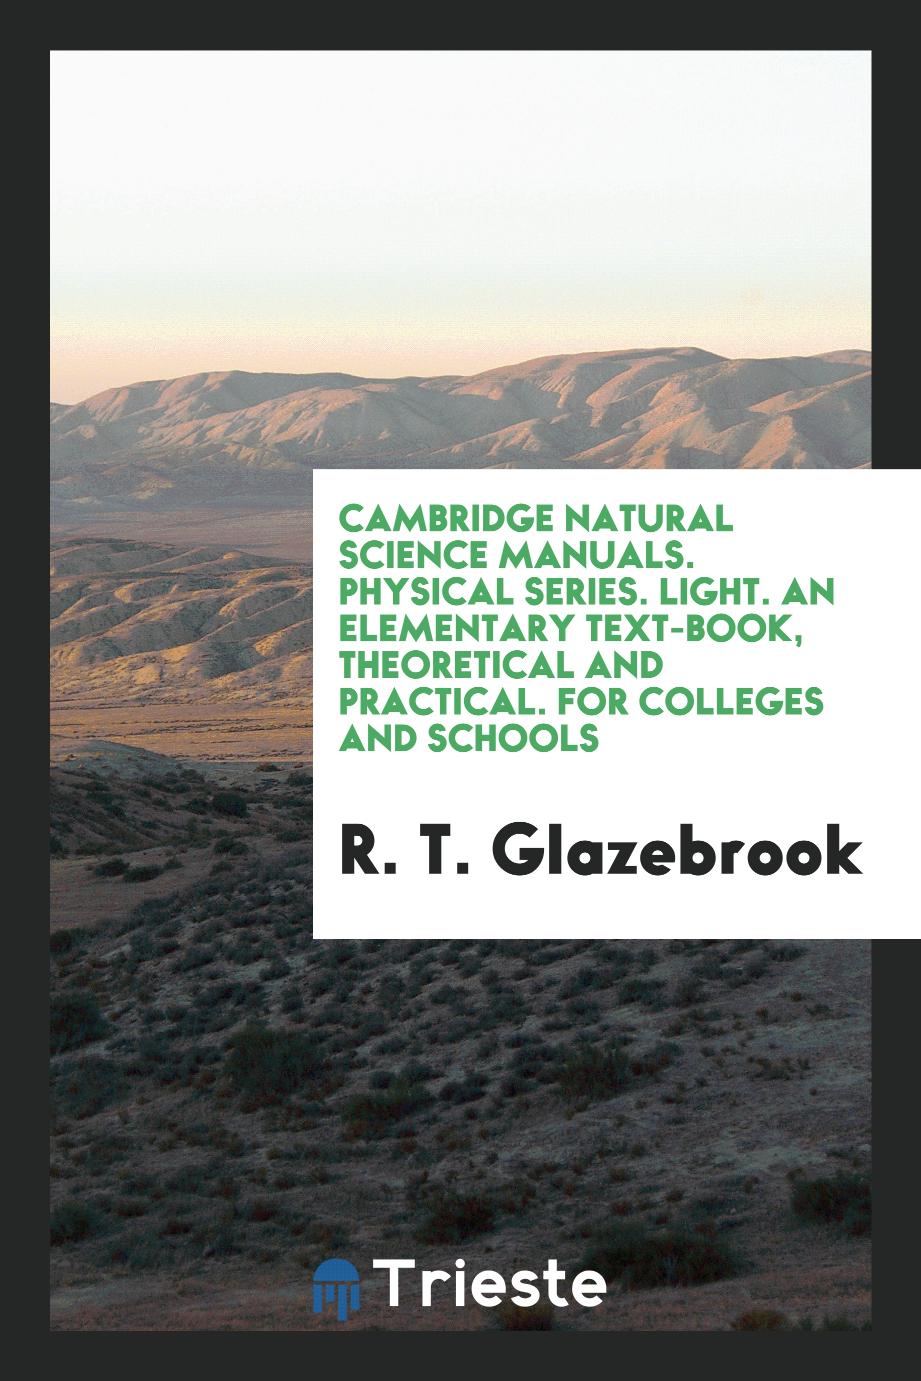 Cambridge Natural Science Manuals. Physical Series. Light. An Elementary Text-Book, Theoretical and Practical. For Colleges and Schools